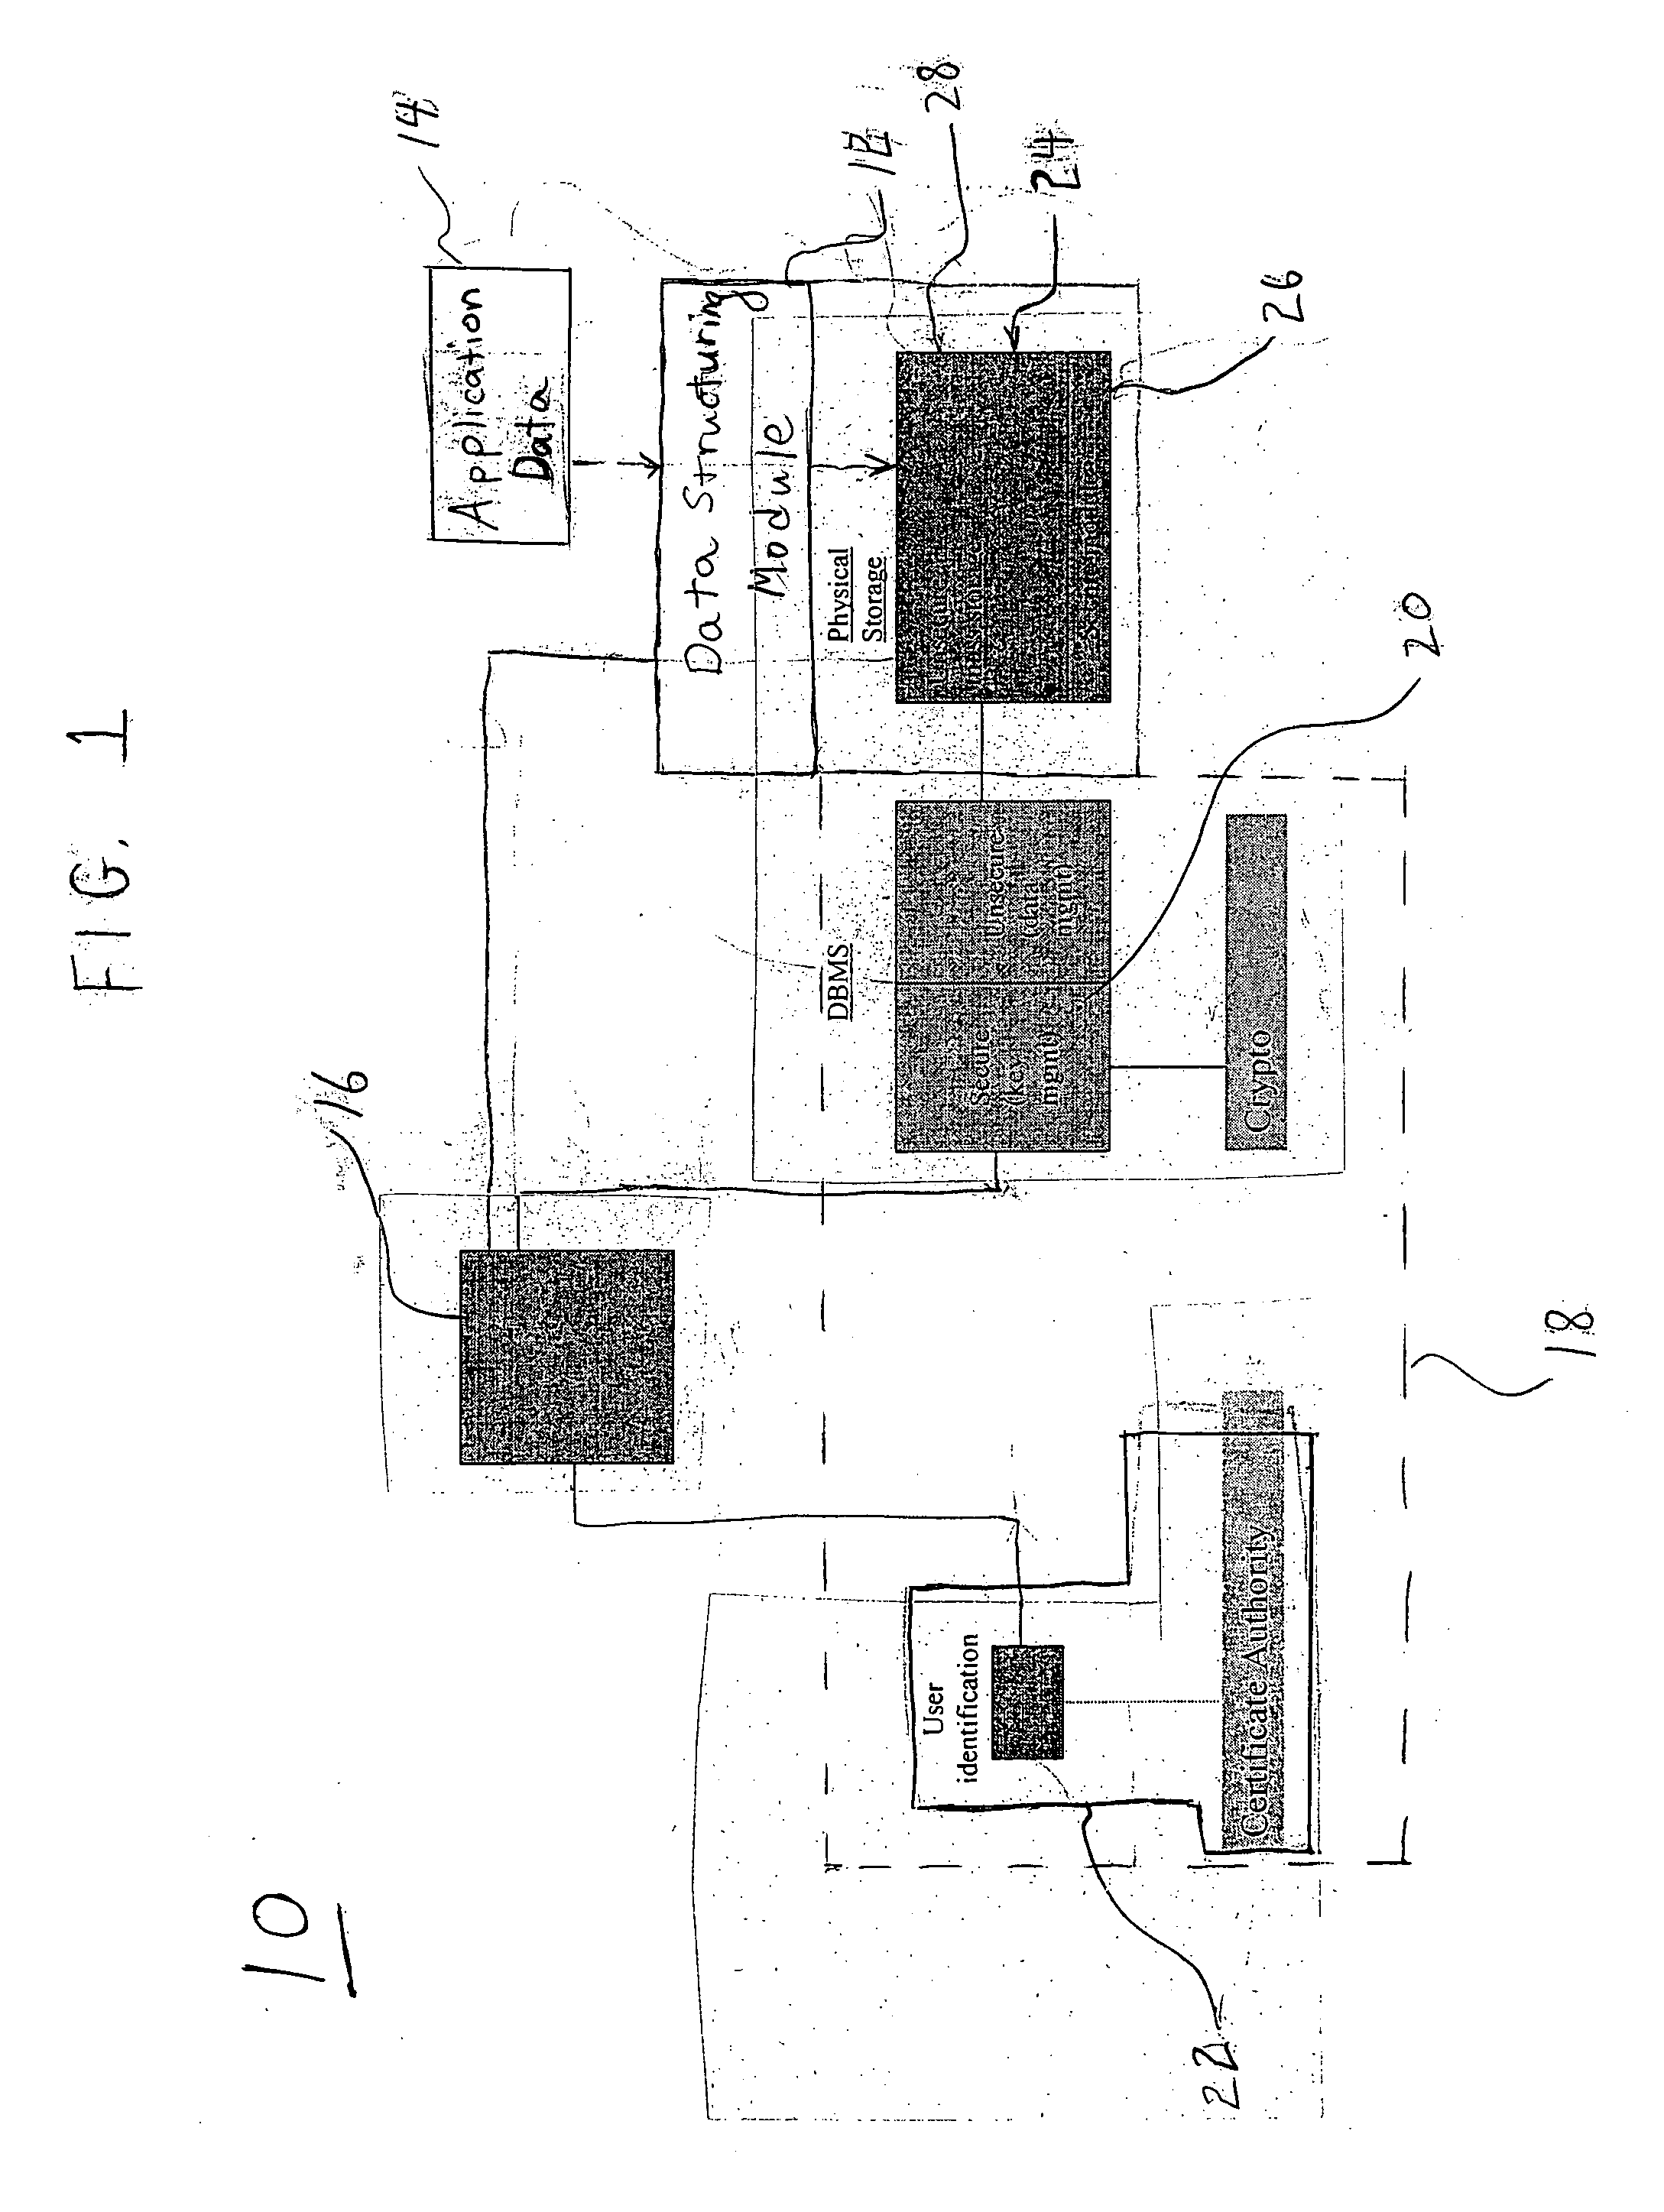 Method and system for providing a secure multi-user portable database